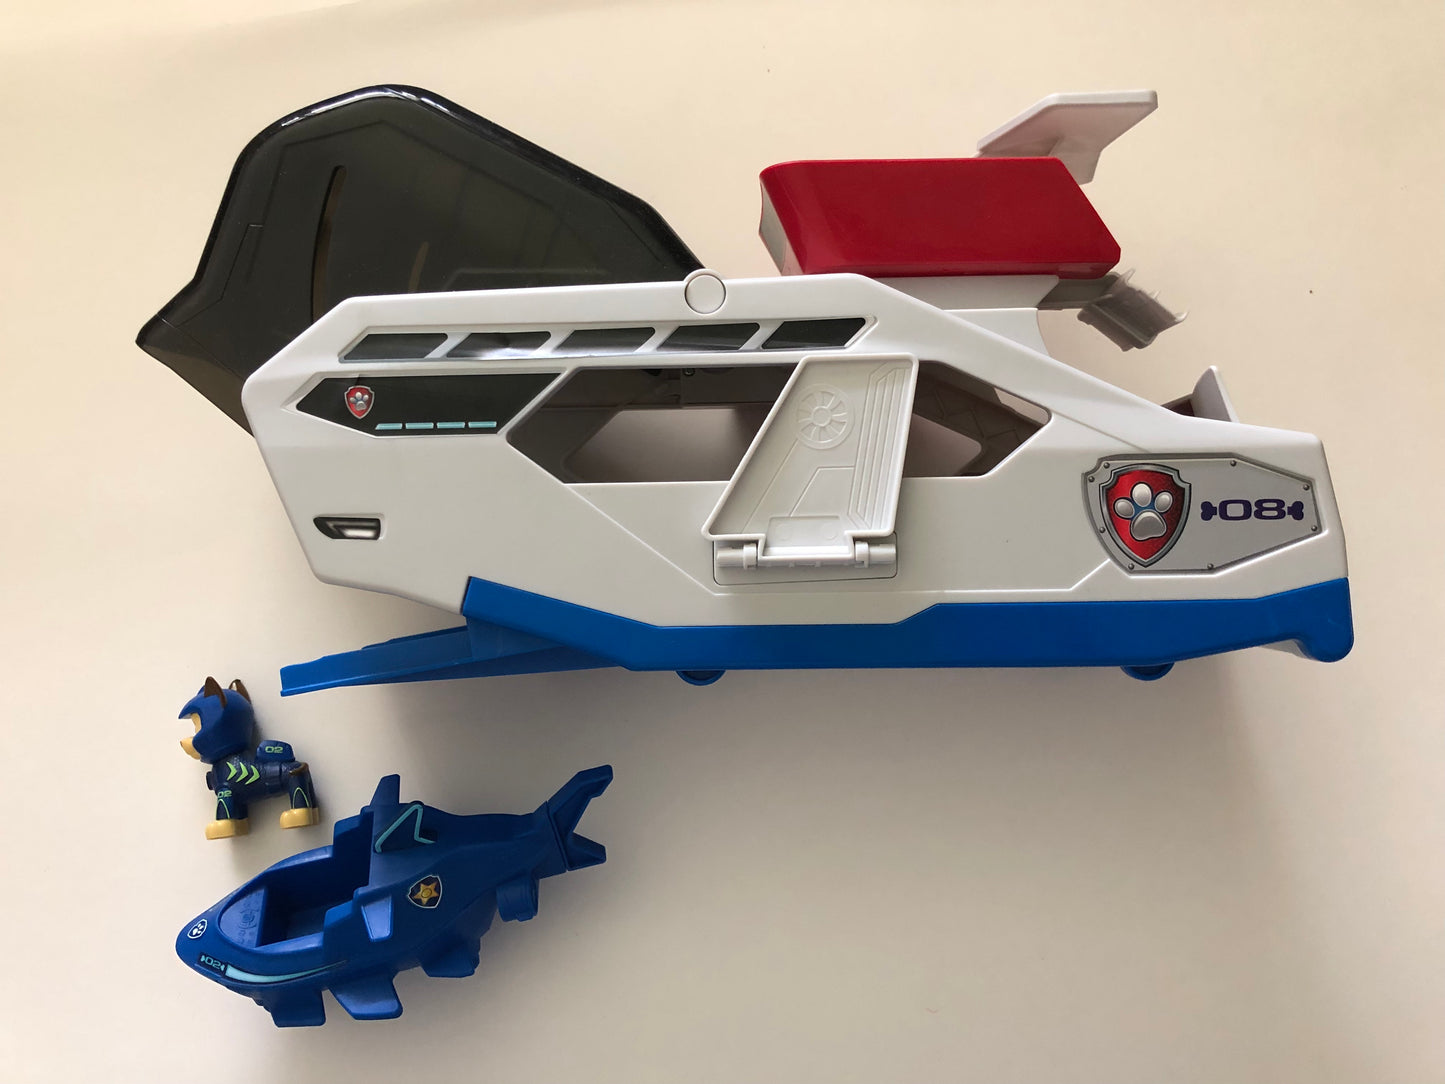 Paw Patrol Whale Patroller Toy (includes chase and boat pictured) like new